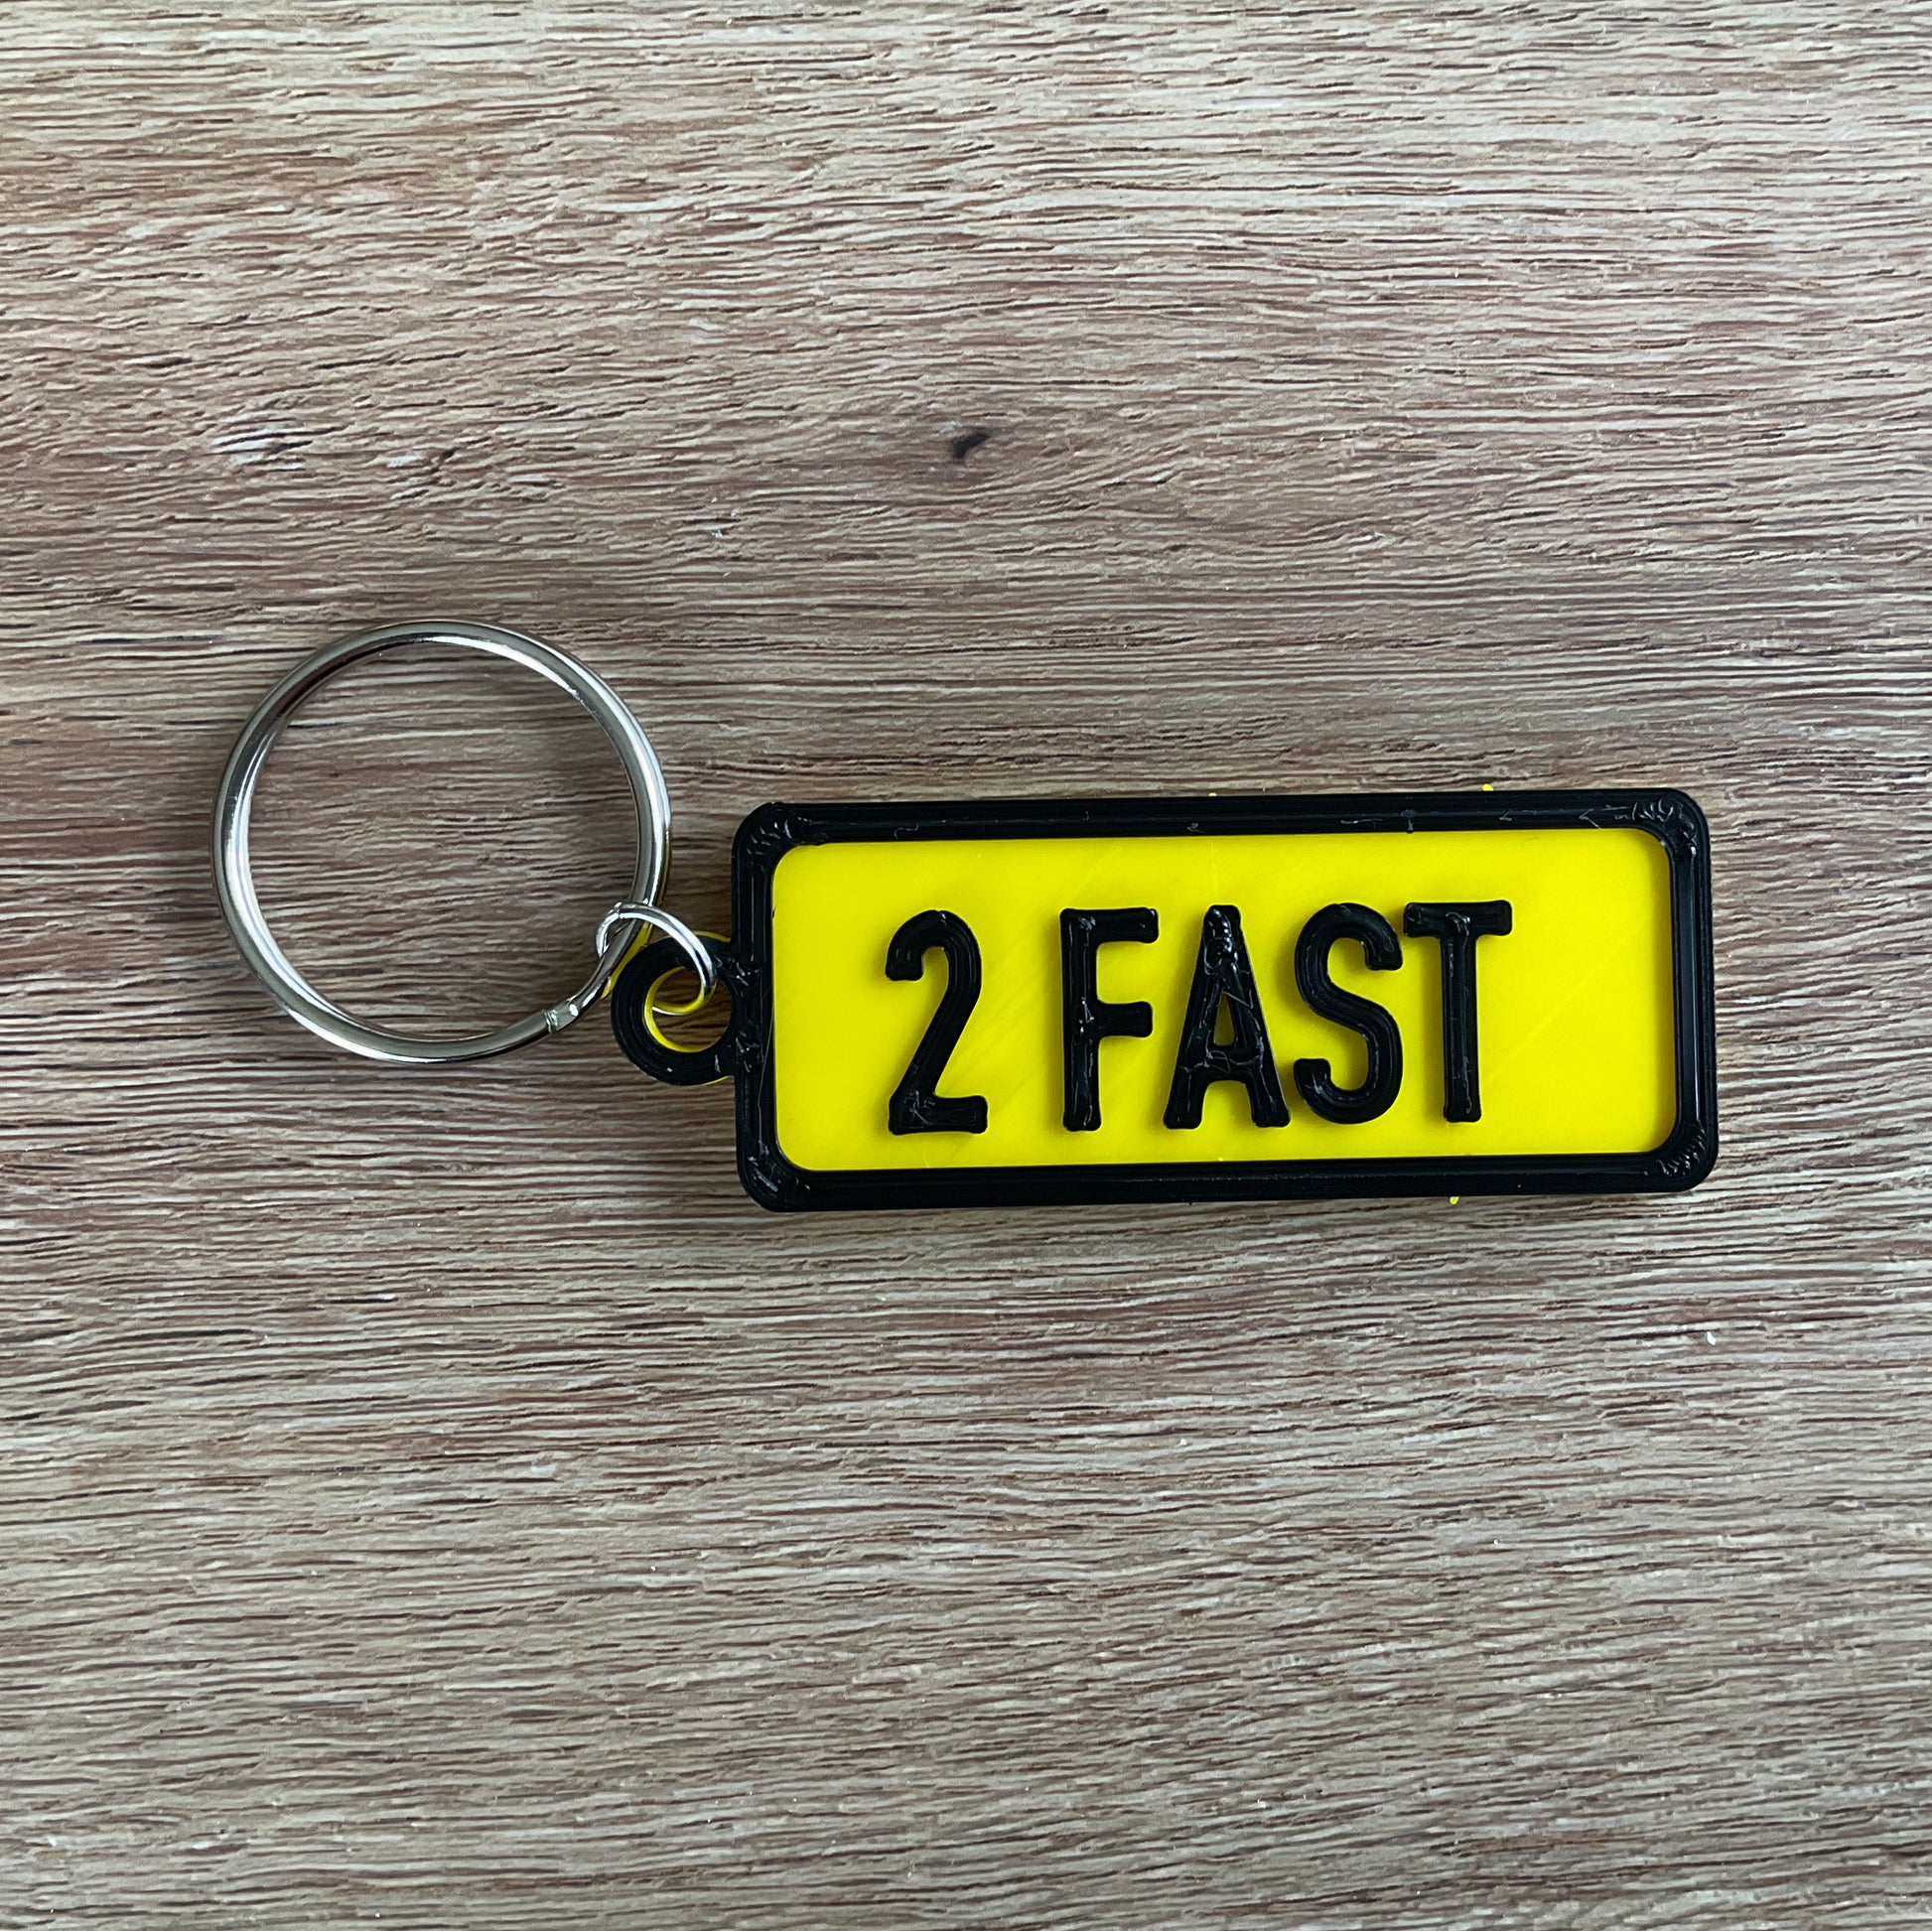 a picture of the too fast keychain in black and yellow.